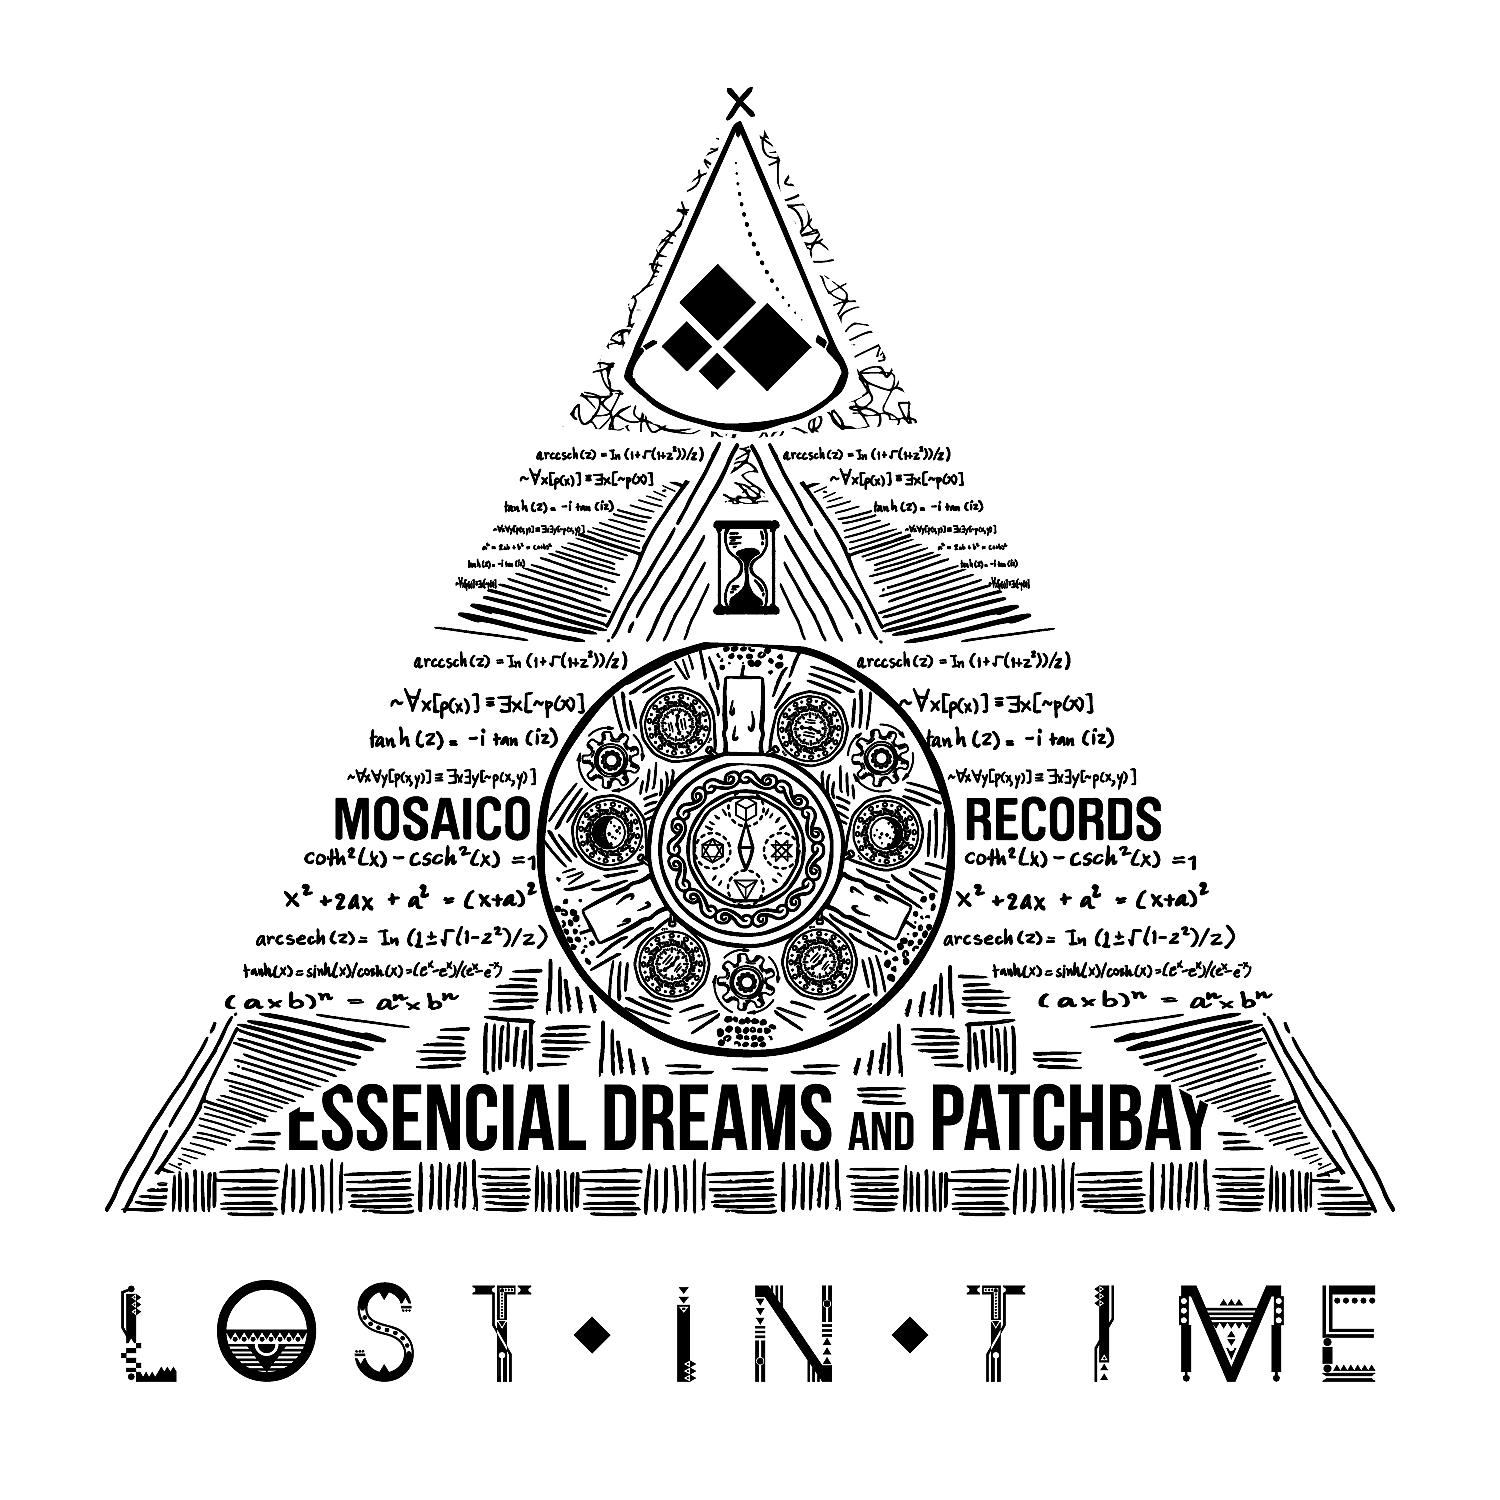 Постер альбома Lost in Time